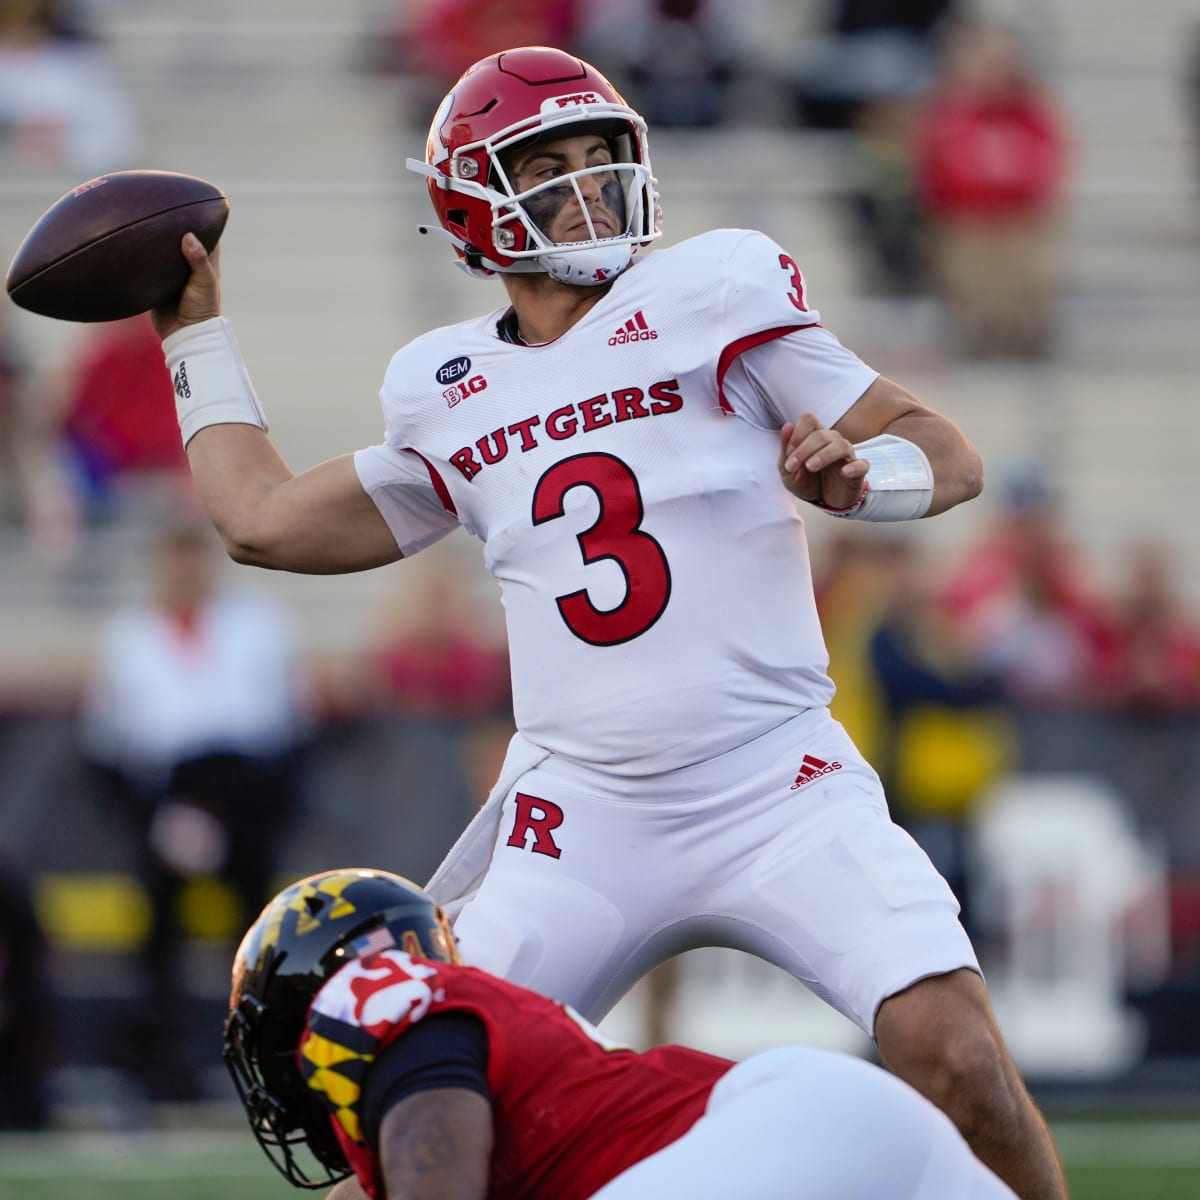 Rutgers Scarlet-White Spring Game Free Live Stream Football - How to Watch and Stream Major League and College Sports